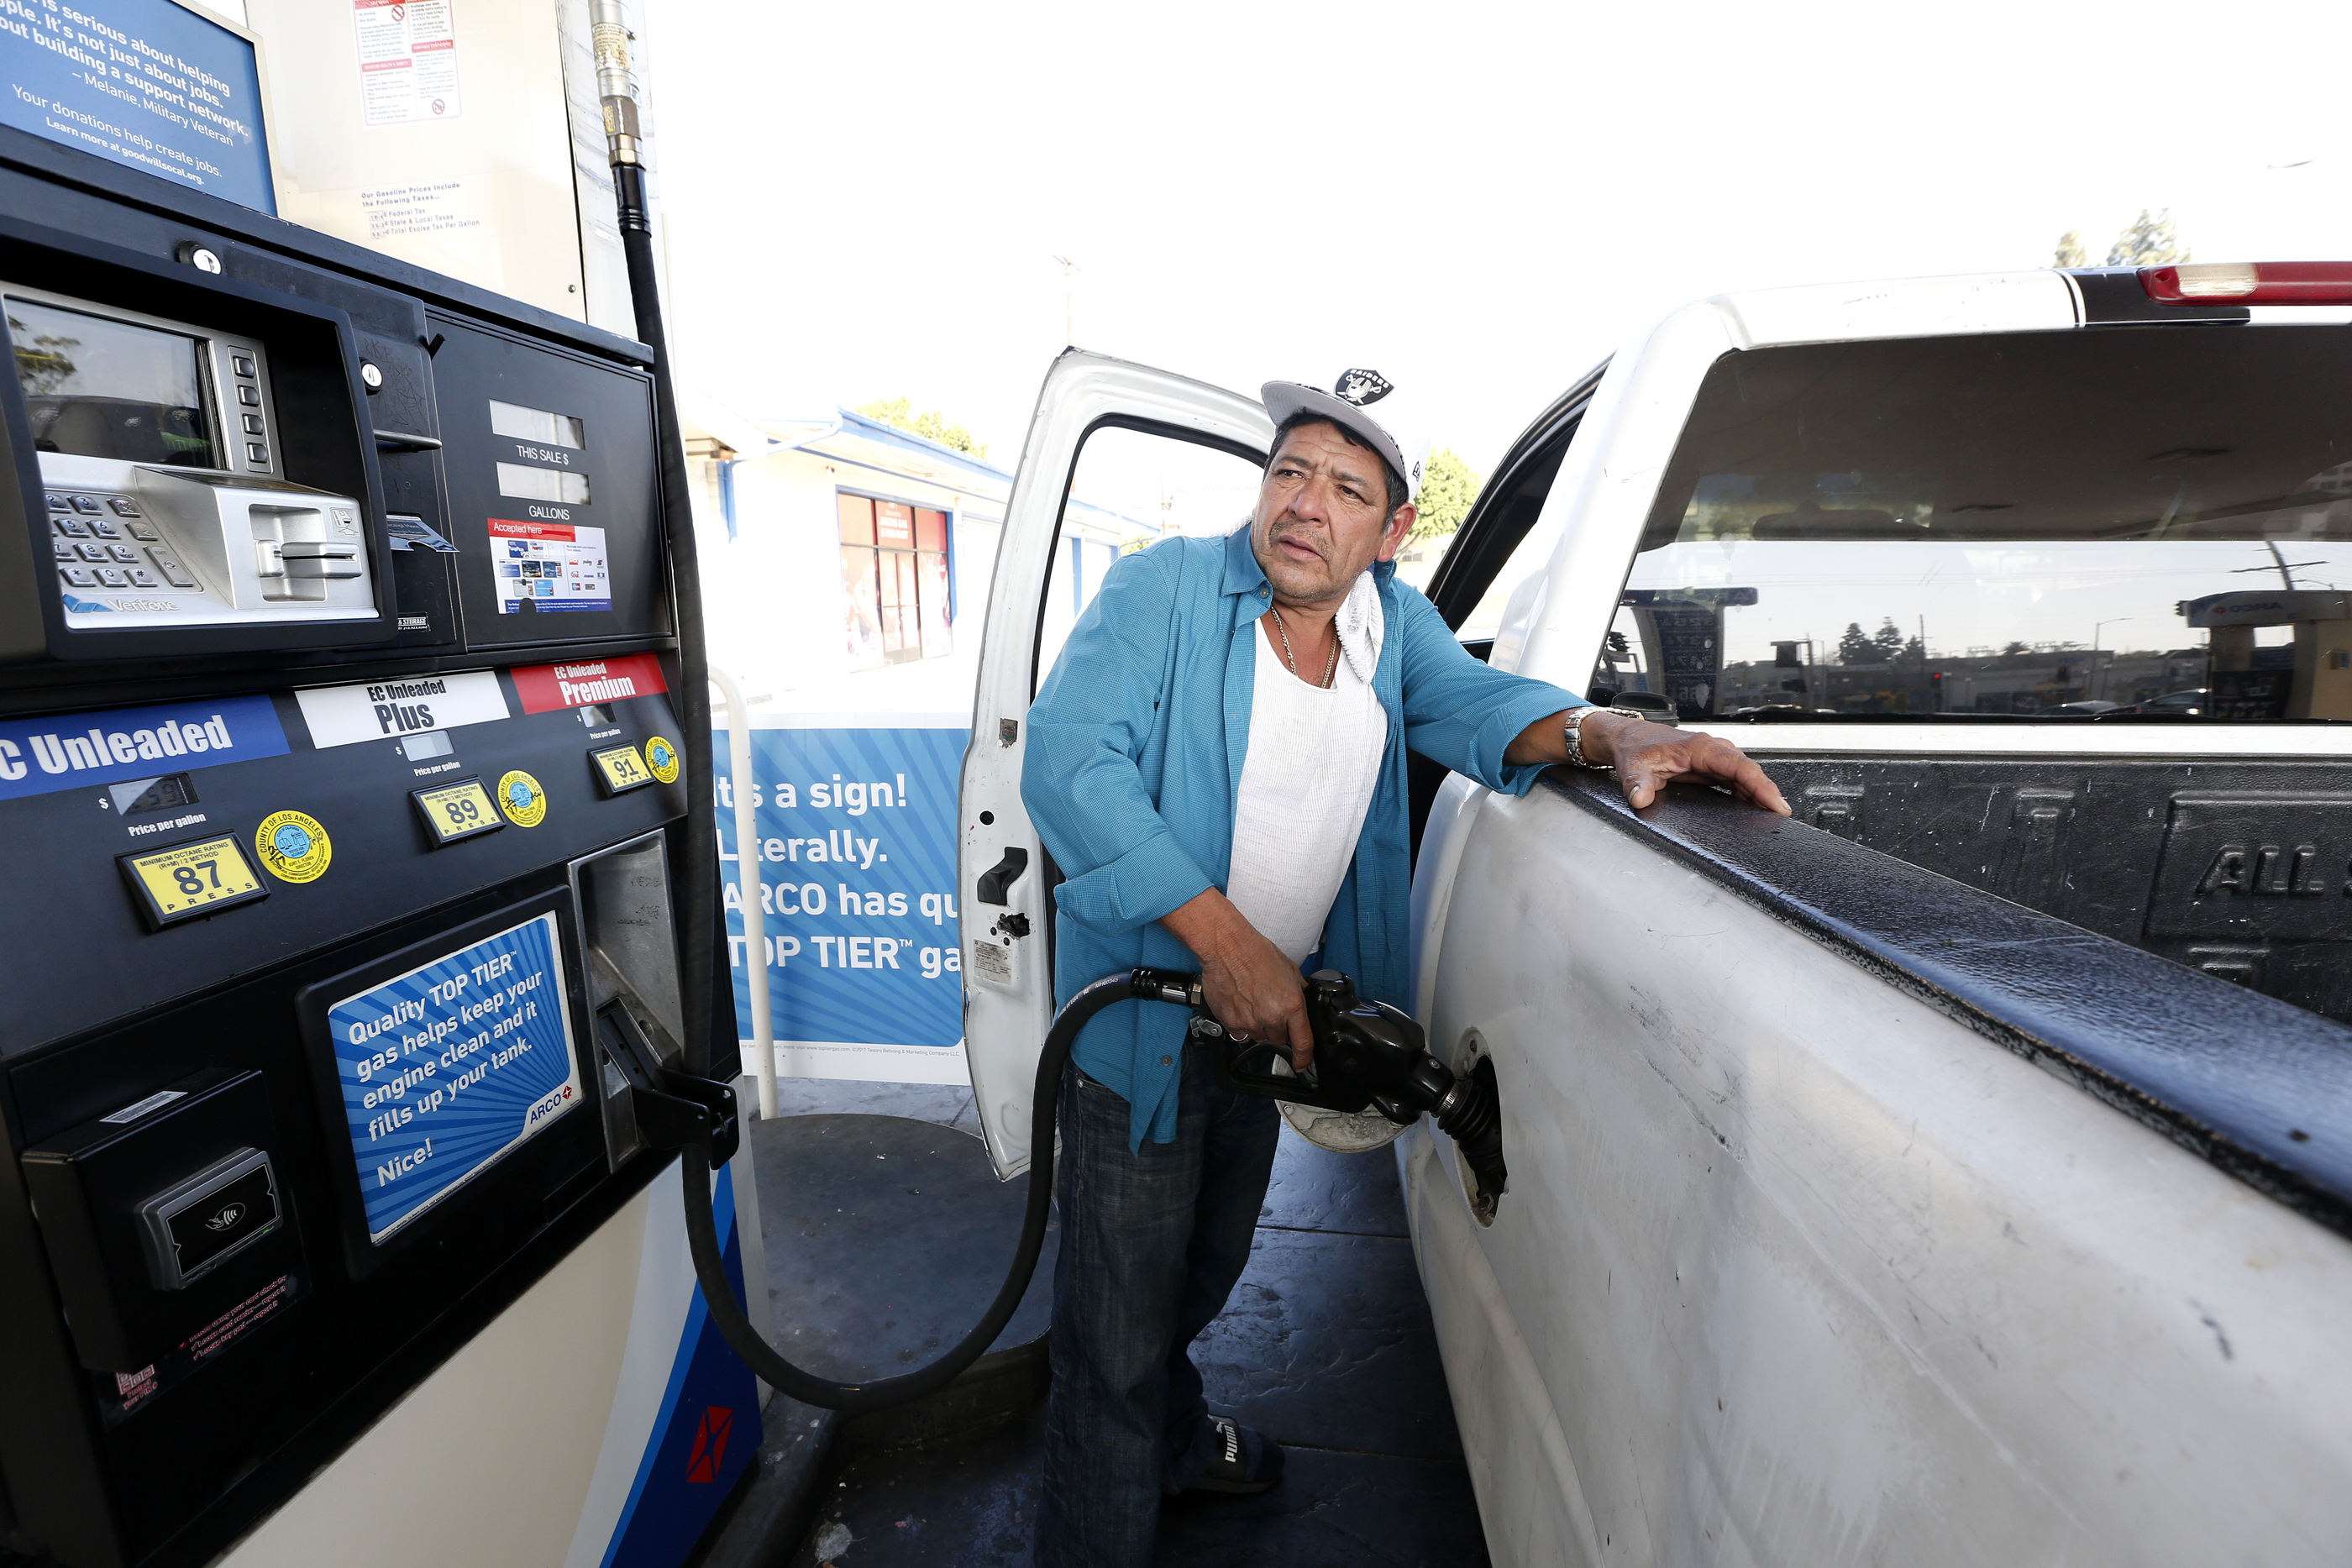 02/05/18 / LOS ANGELES/Motorist Mario Ramos discusses gas prices in the Los Angeles area while pumping gas. Motorists are being hit with a double whammy as wholesale oil prices around the world went up just as the tax hit. The result for Los Angeles County has been a whopping 21-cent increase in average pump prices since this time last week, according to the Auto Club of Southern California. (Photo by Aurelia Ventura/La Opinion)